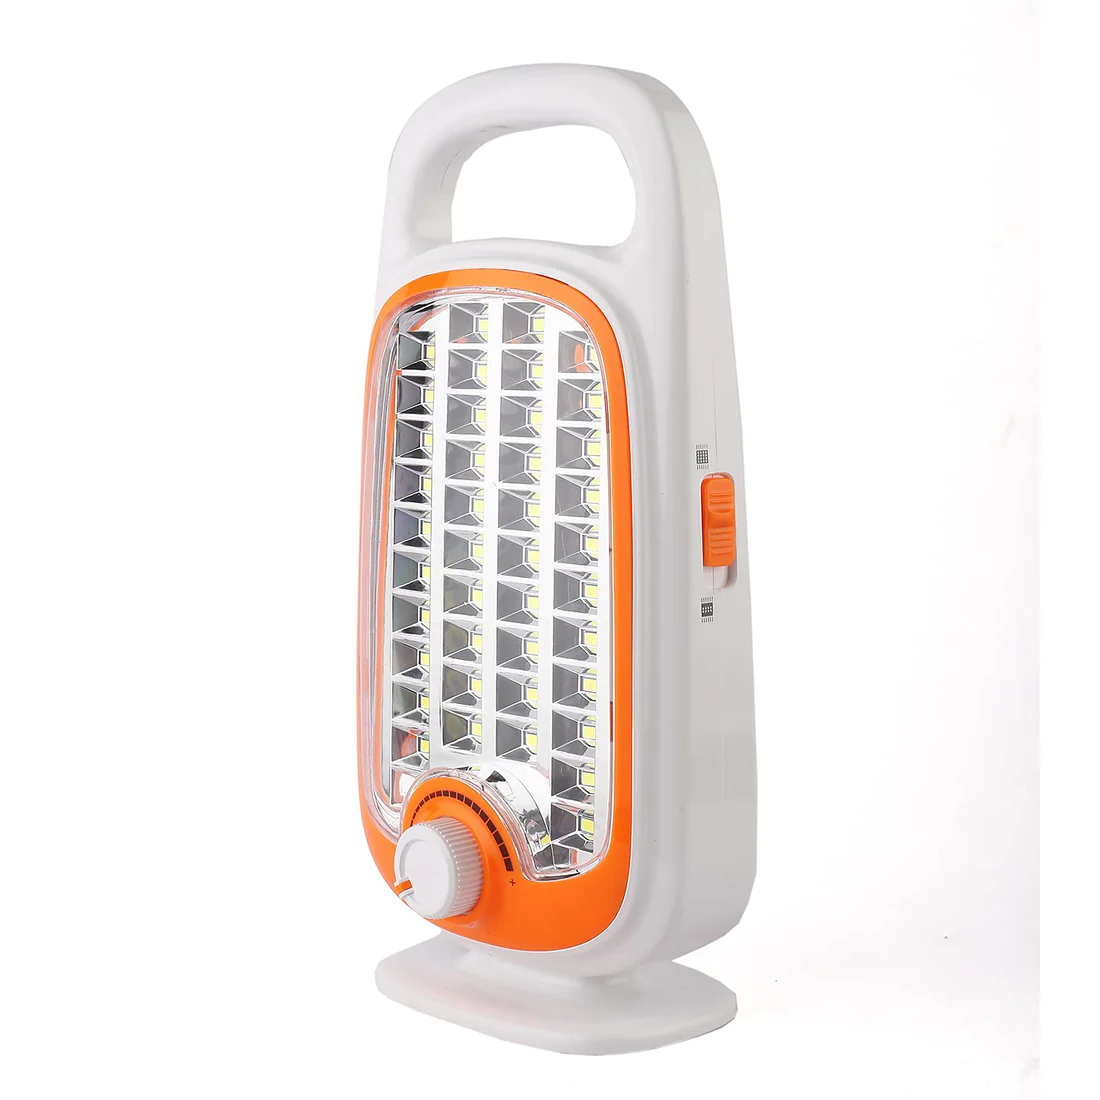 Rechargeable LED Lamps DP 7128